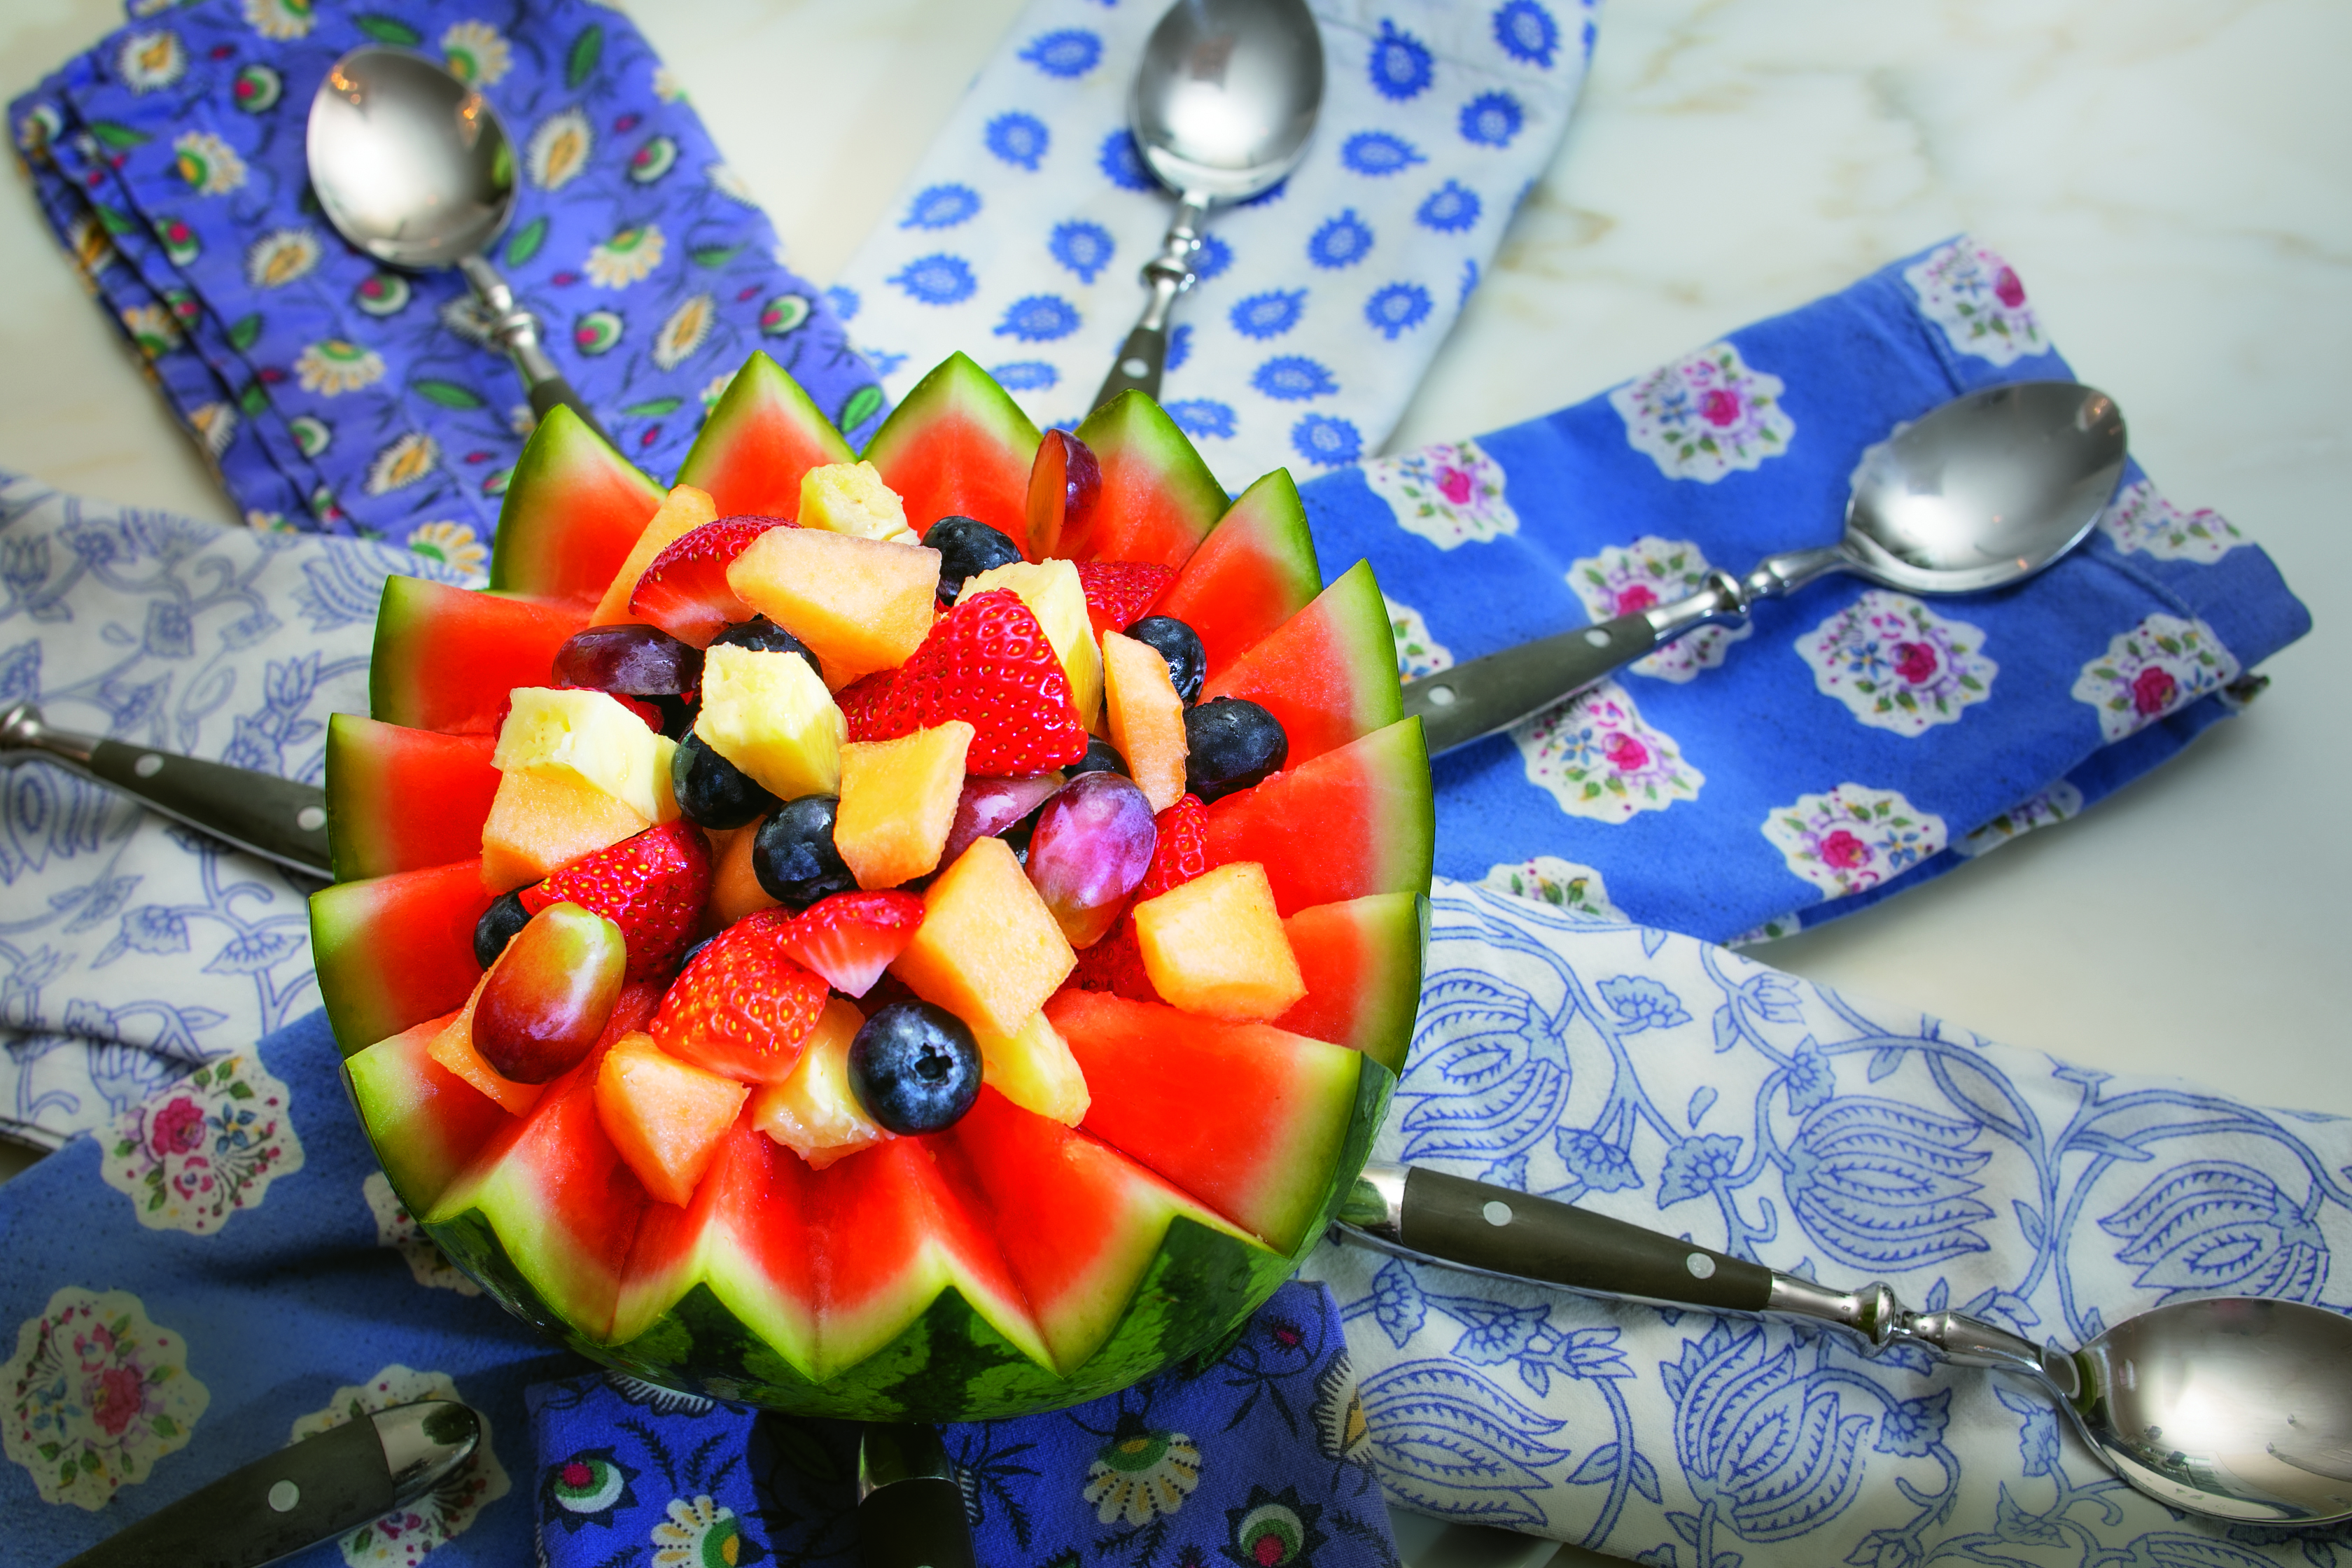 Fruit salad in a decorative watermelon gives a summer table refreshing style. Use a marker to draw a serrated border and carve carefully. Fill the cavity with your favorite berries and fruit and dress up your table.